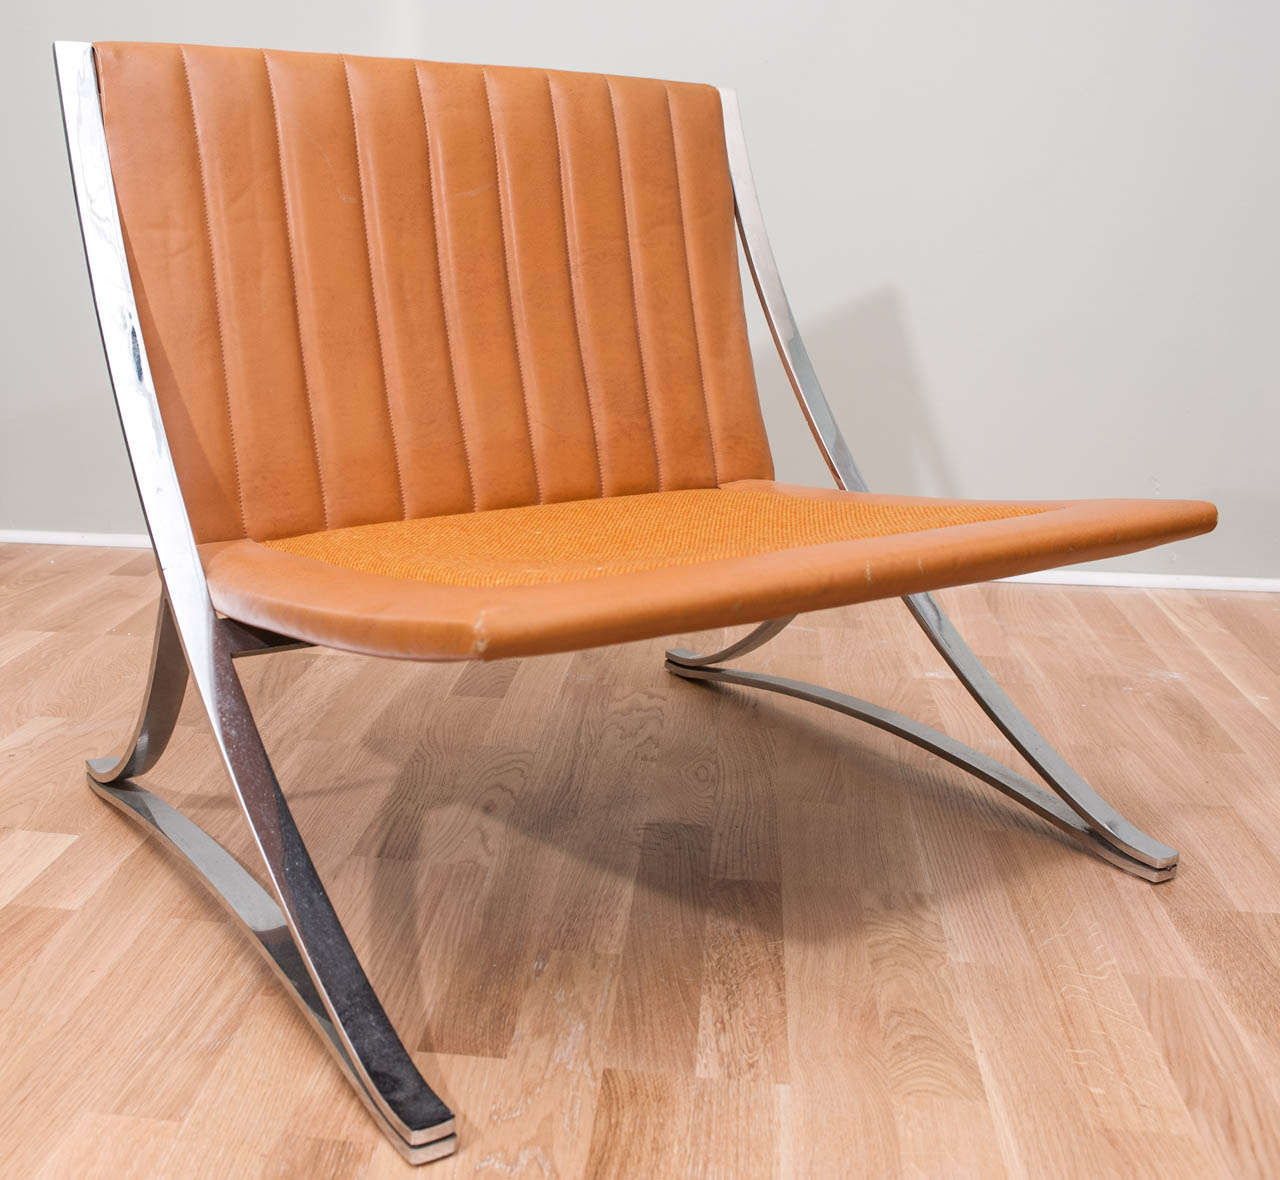 Steel Pair of Vintage Leather Chairs In the Style of Mies van der Rohe